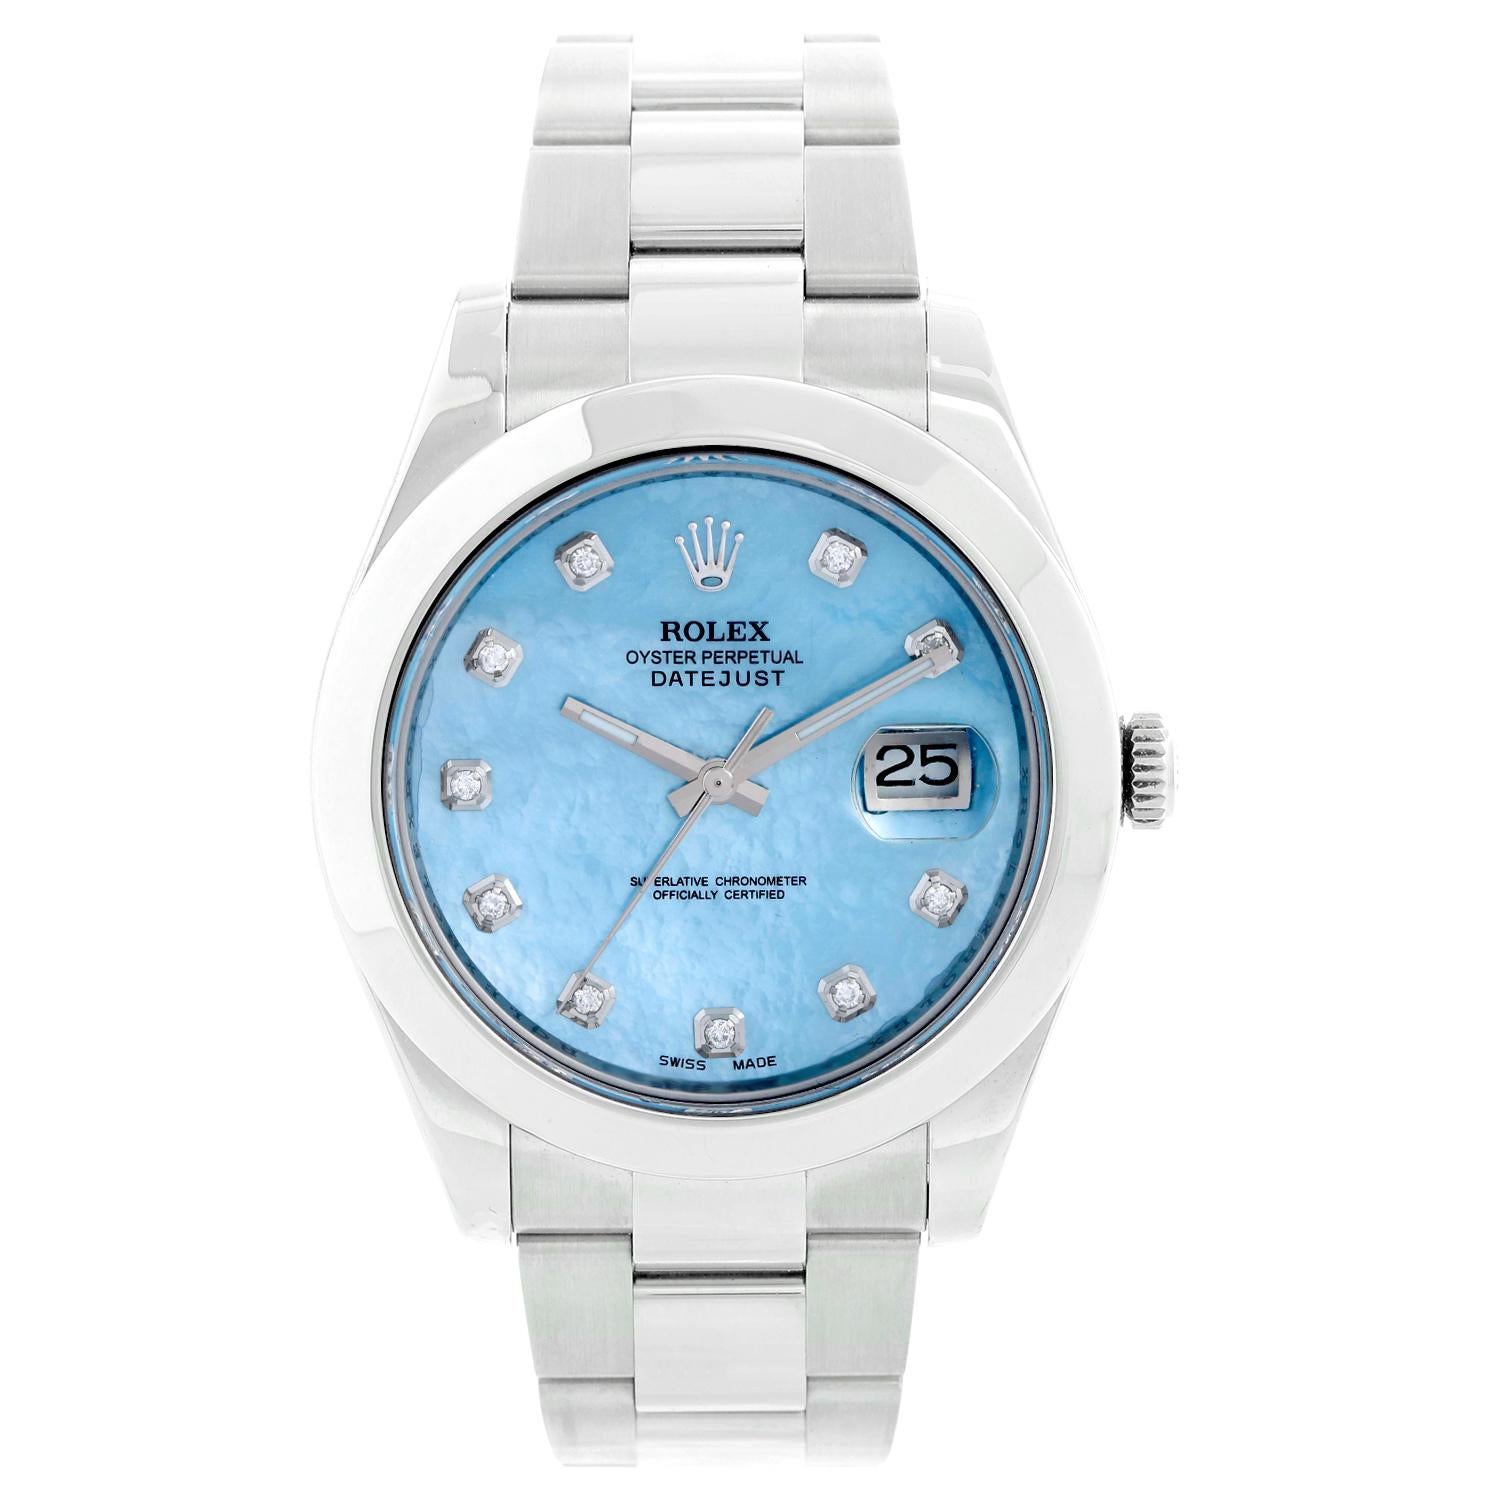 Rolex Datejust II Men's 41mm Custom Mother of Pearl  Watch 116300 - Automatic winding, sapphire crystal, serial number engraved in bezel. Stainless steel case with smooth domed bezel (41mm diameter). Custom Mother of Peal dial with diamond hour